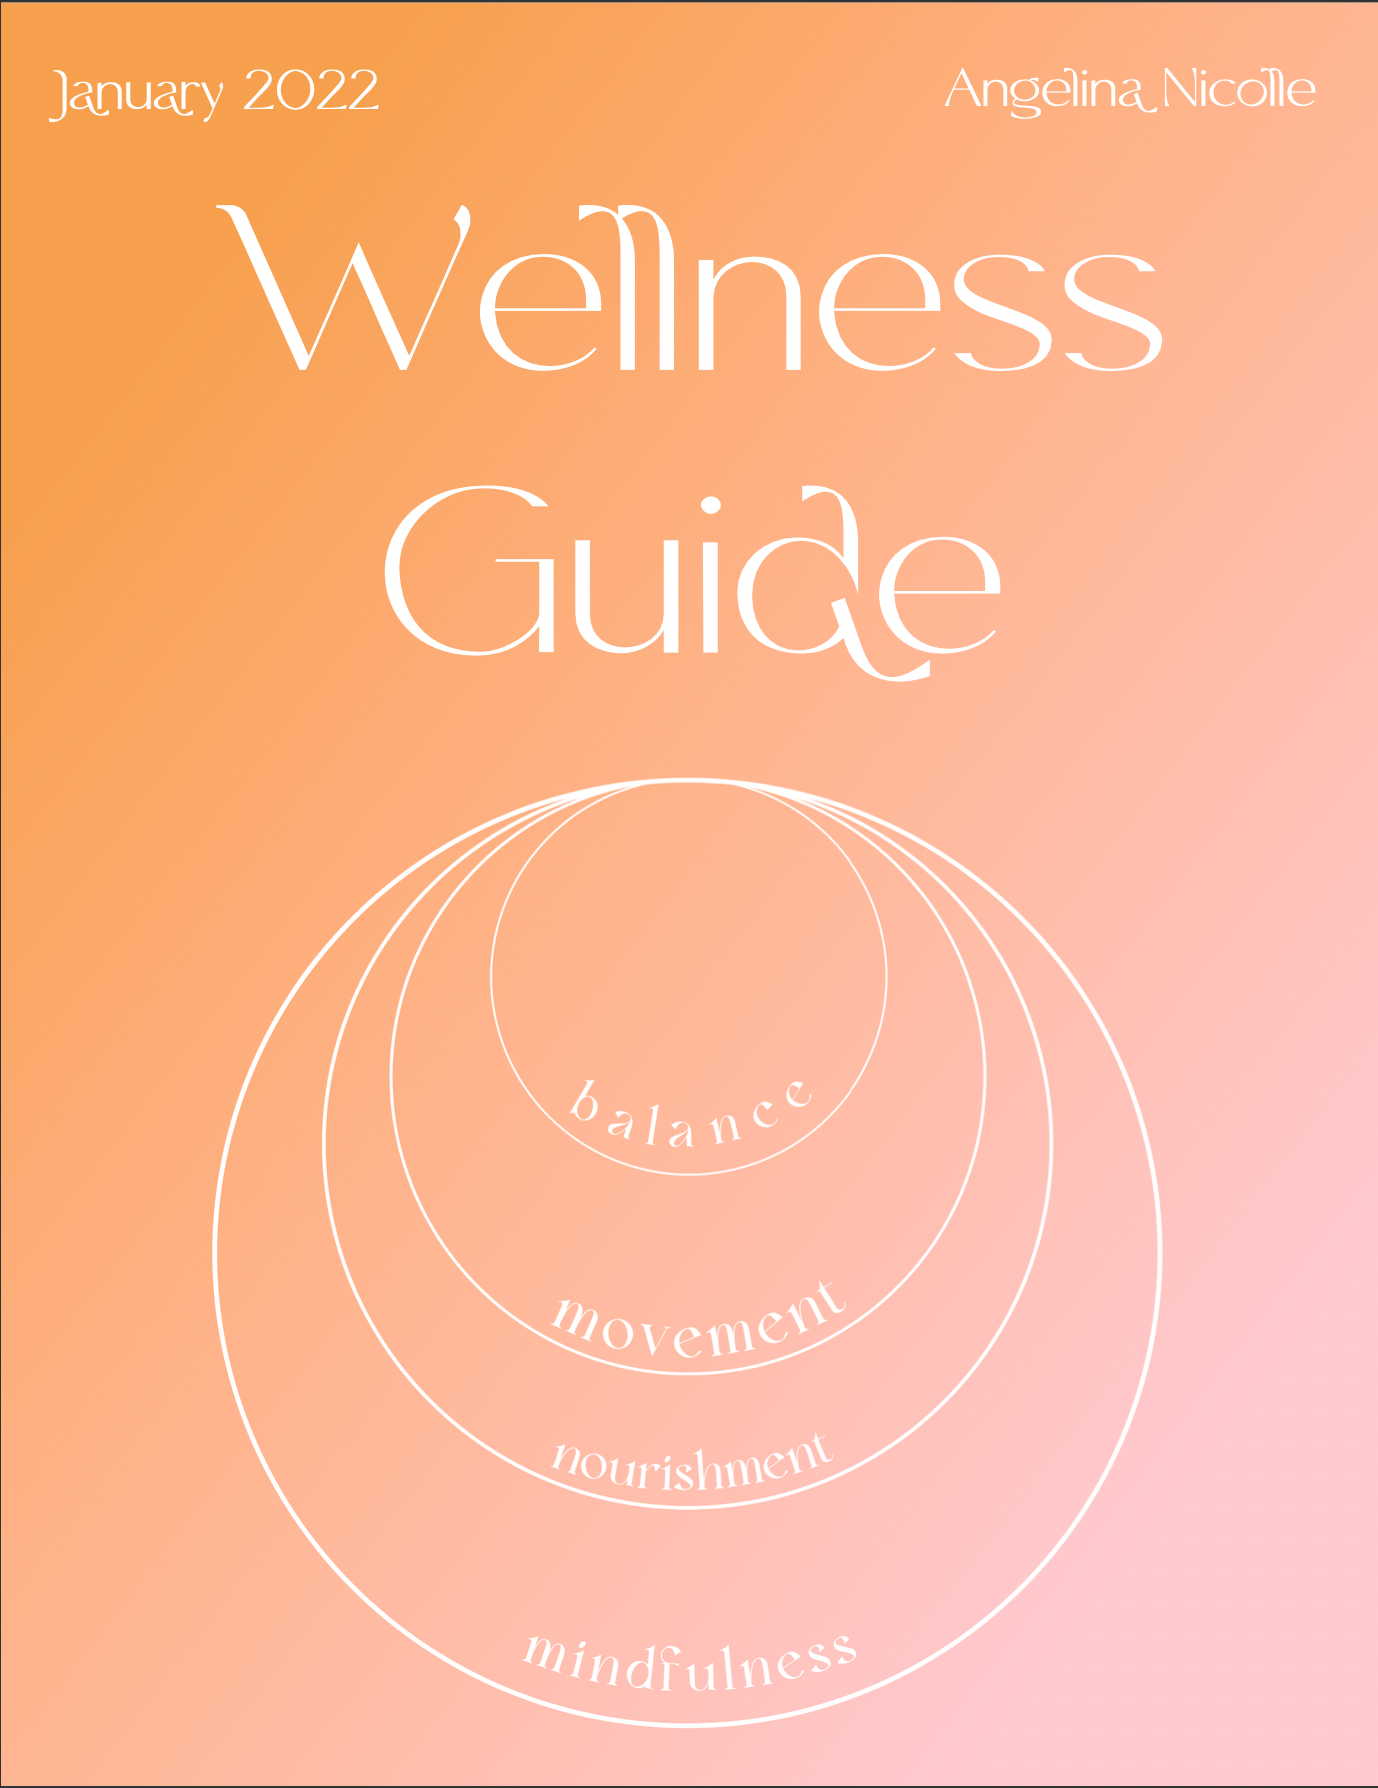 Monthly Wellness Guide - subscription